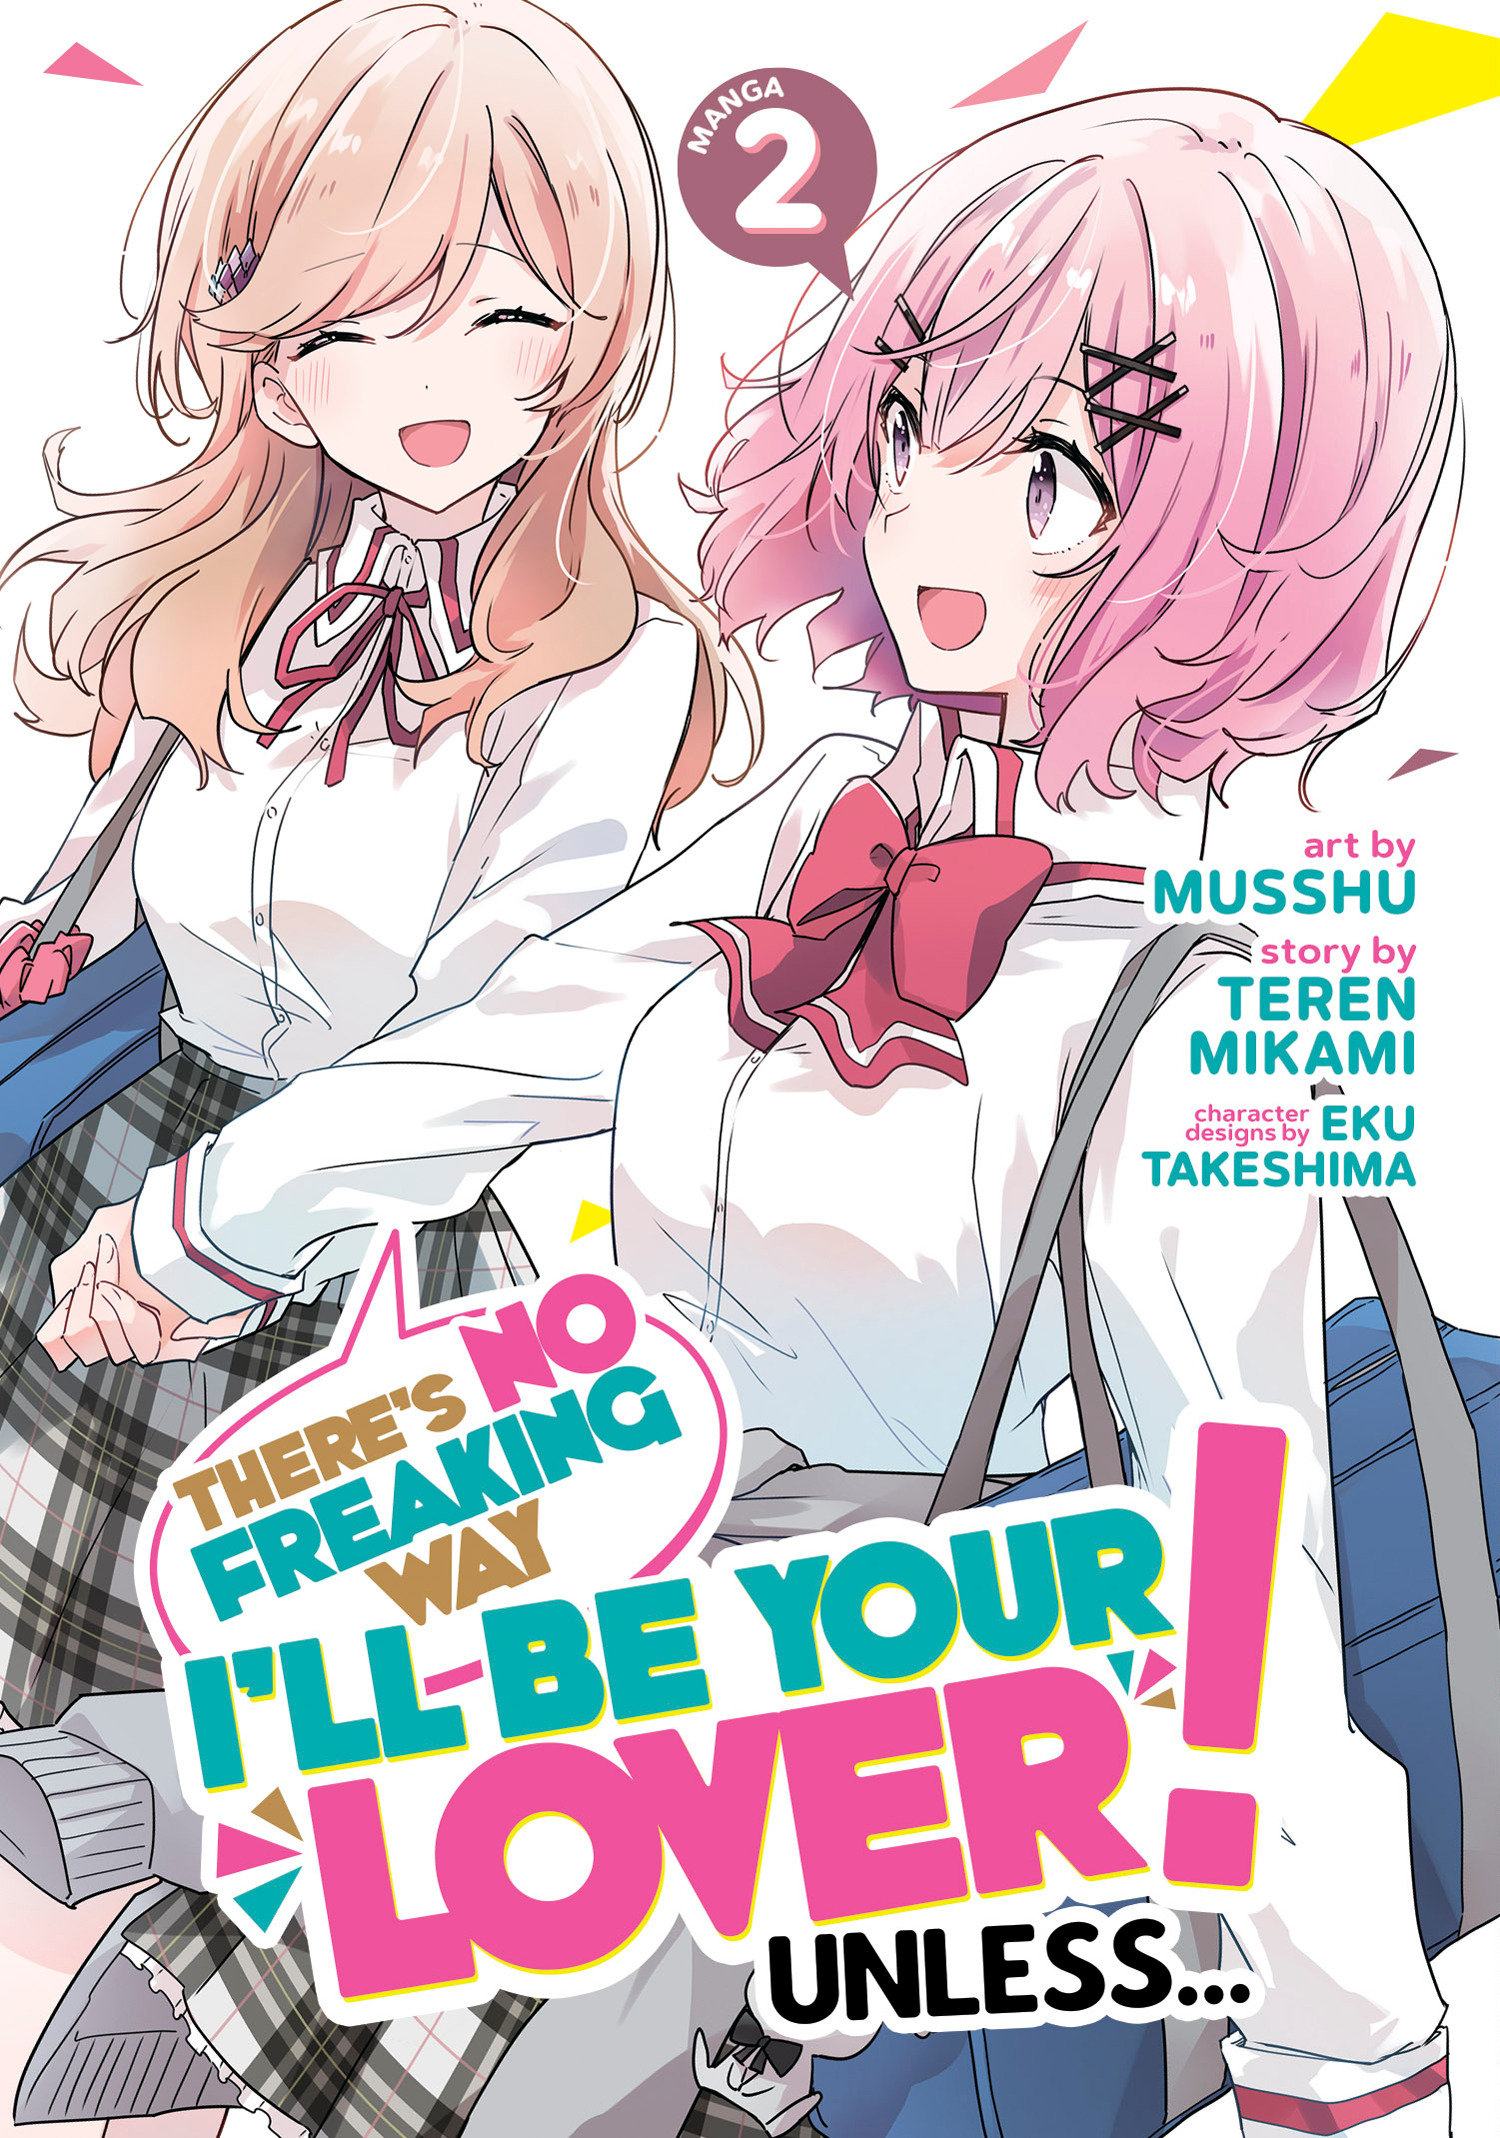 There's No Freaking Way I'll be Your Lover! Unless... Manga Volume 2